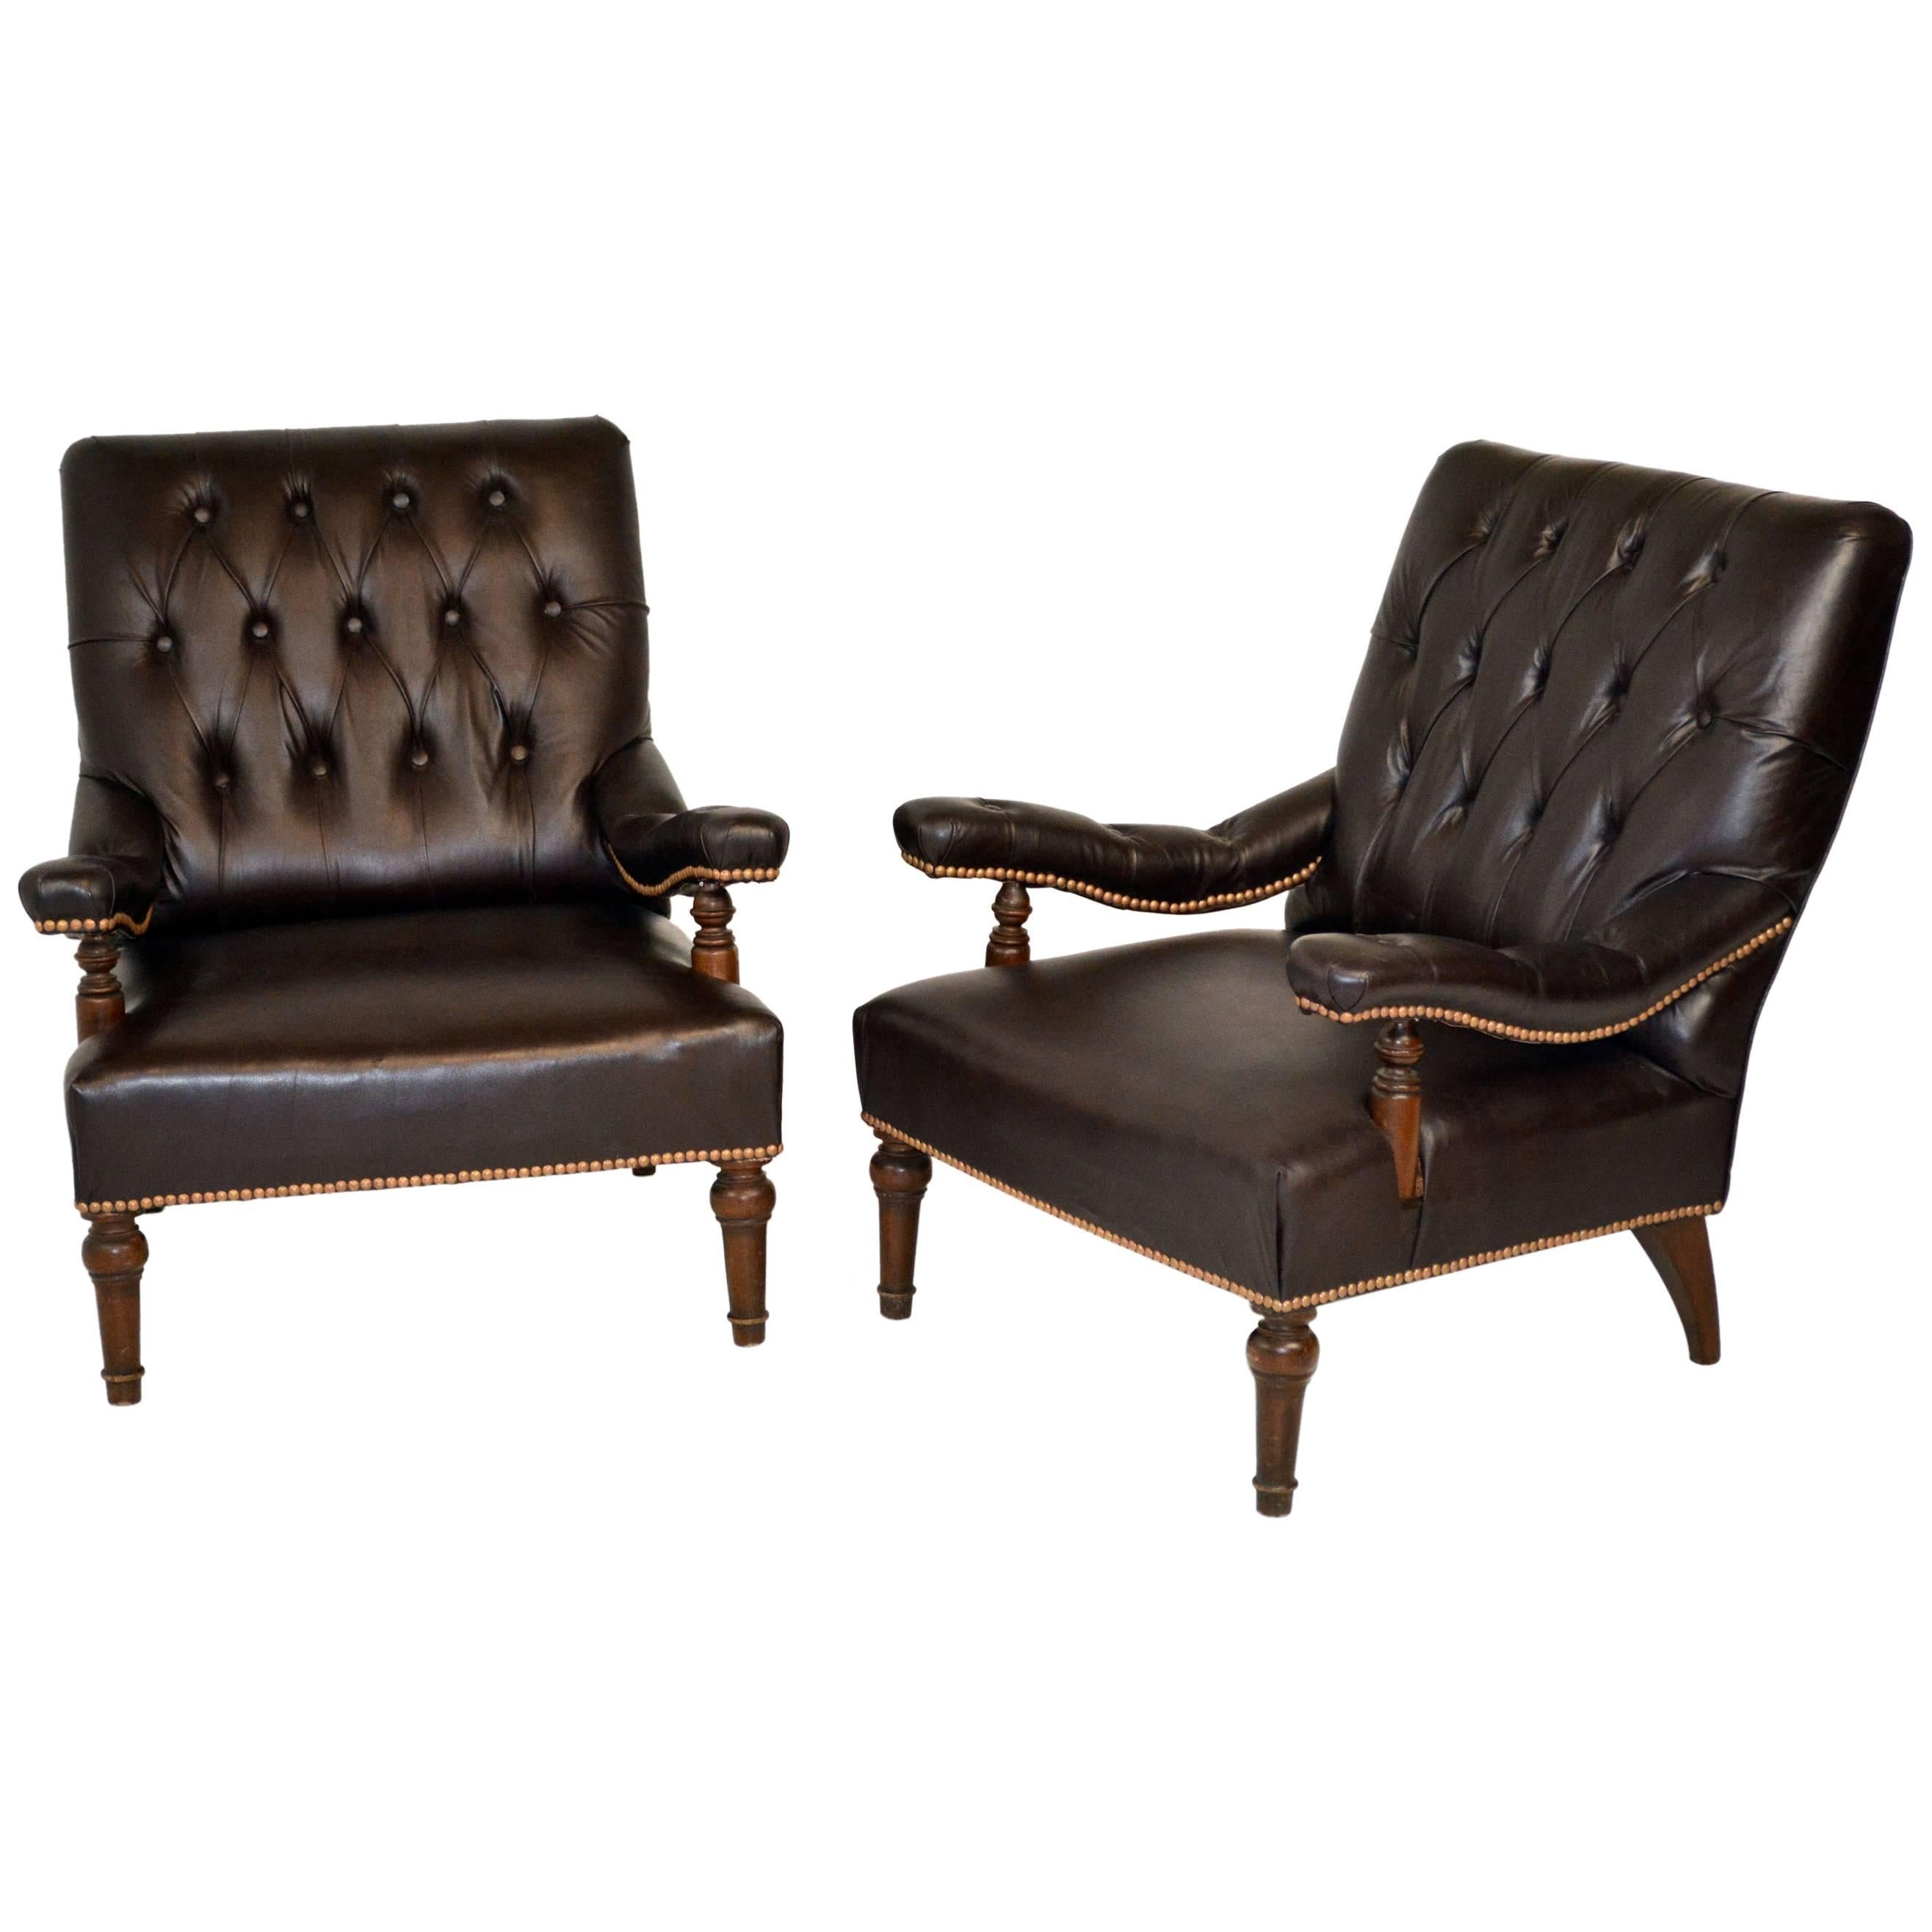 Pair of Edwardian English Leather Library Chairs